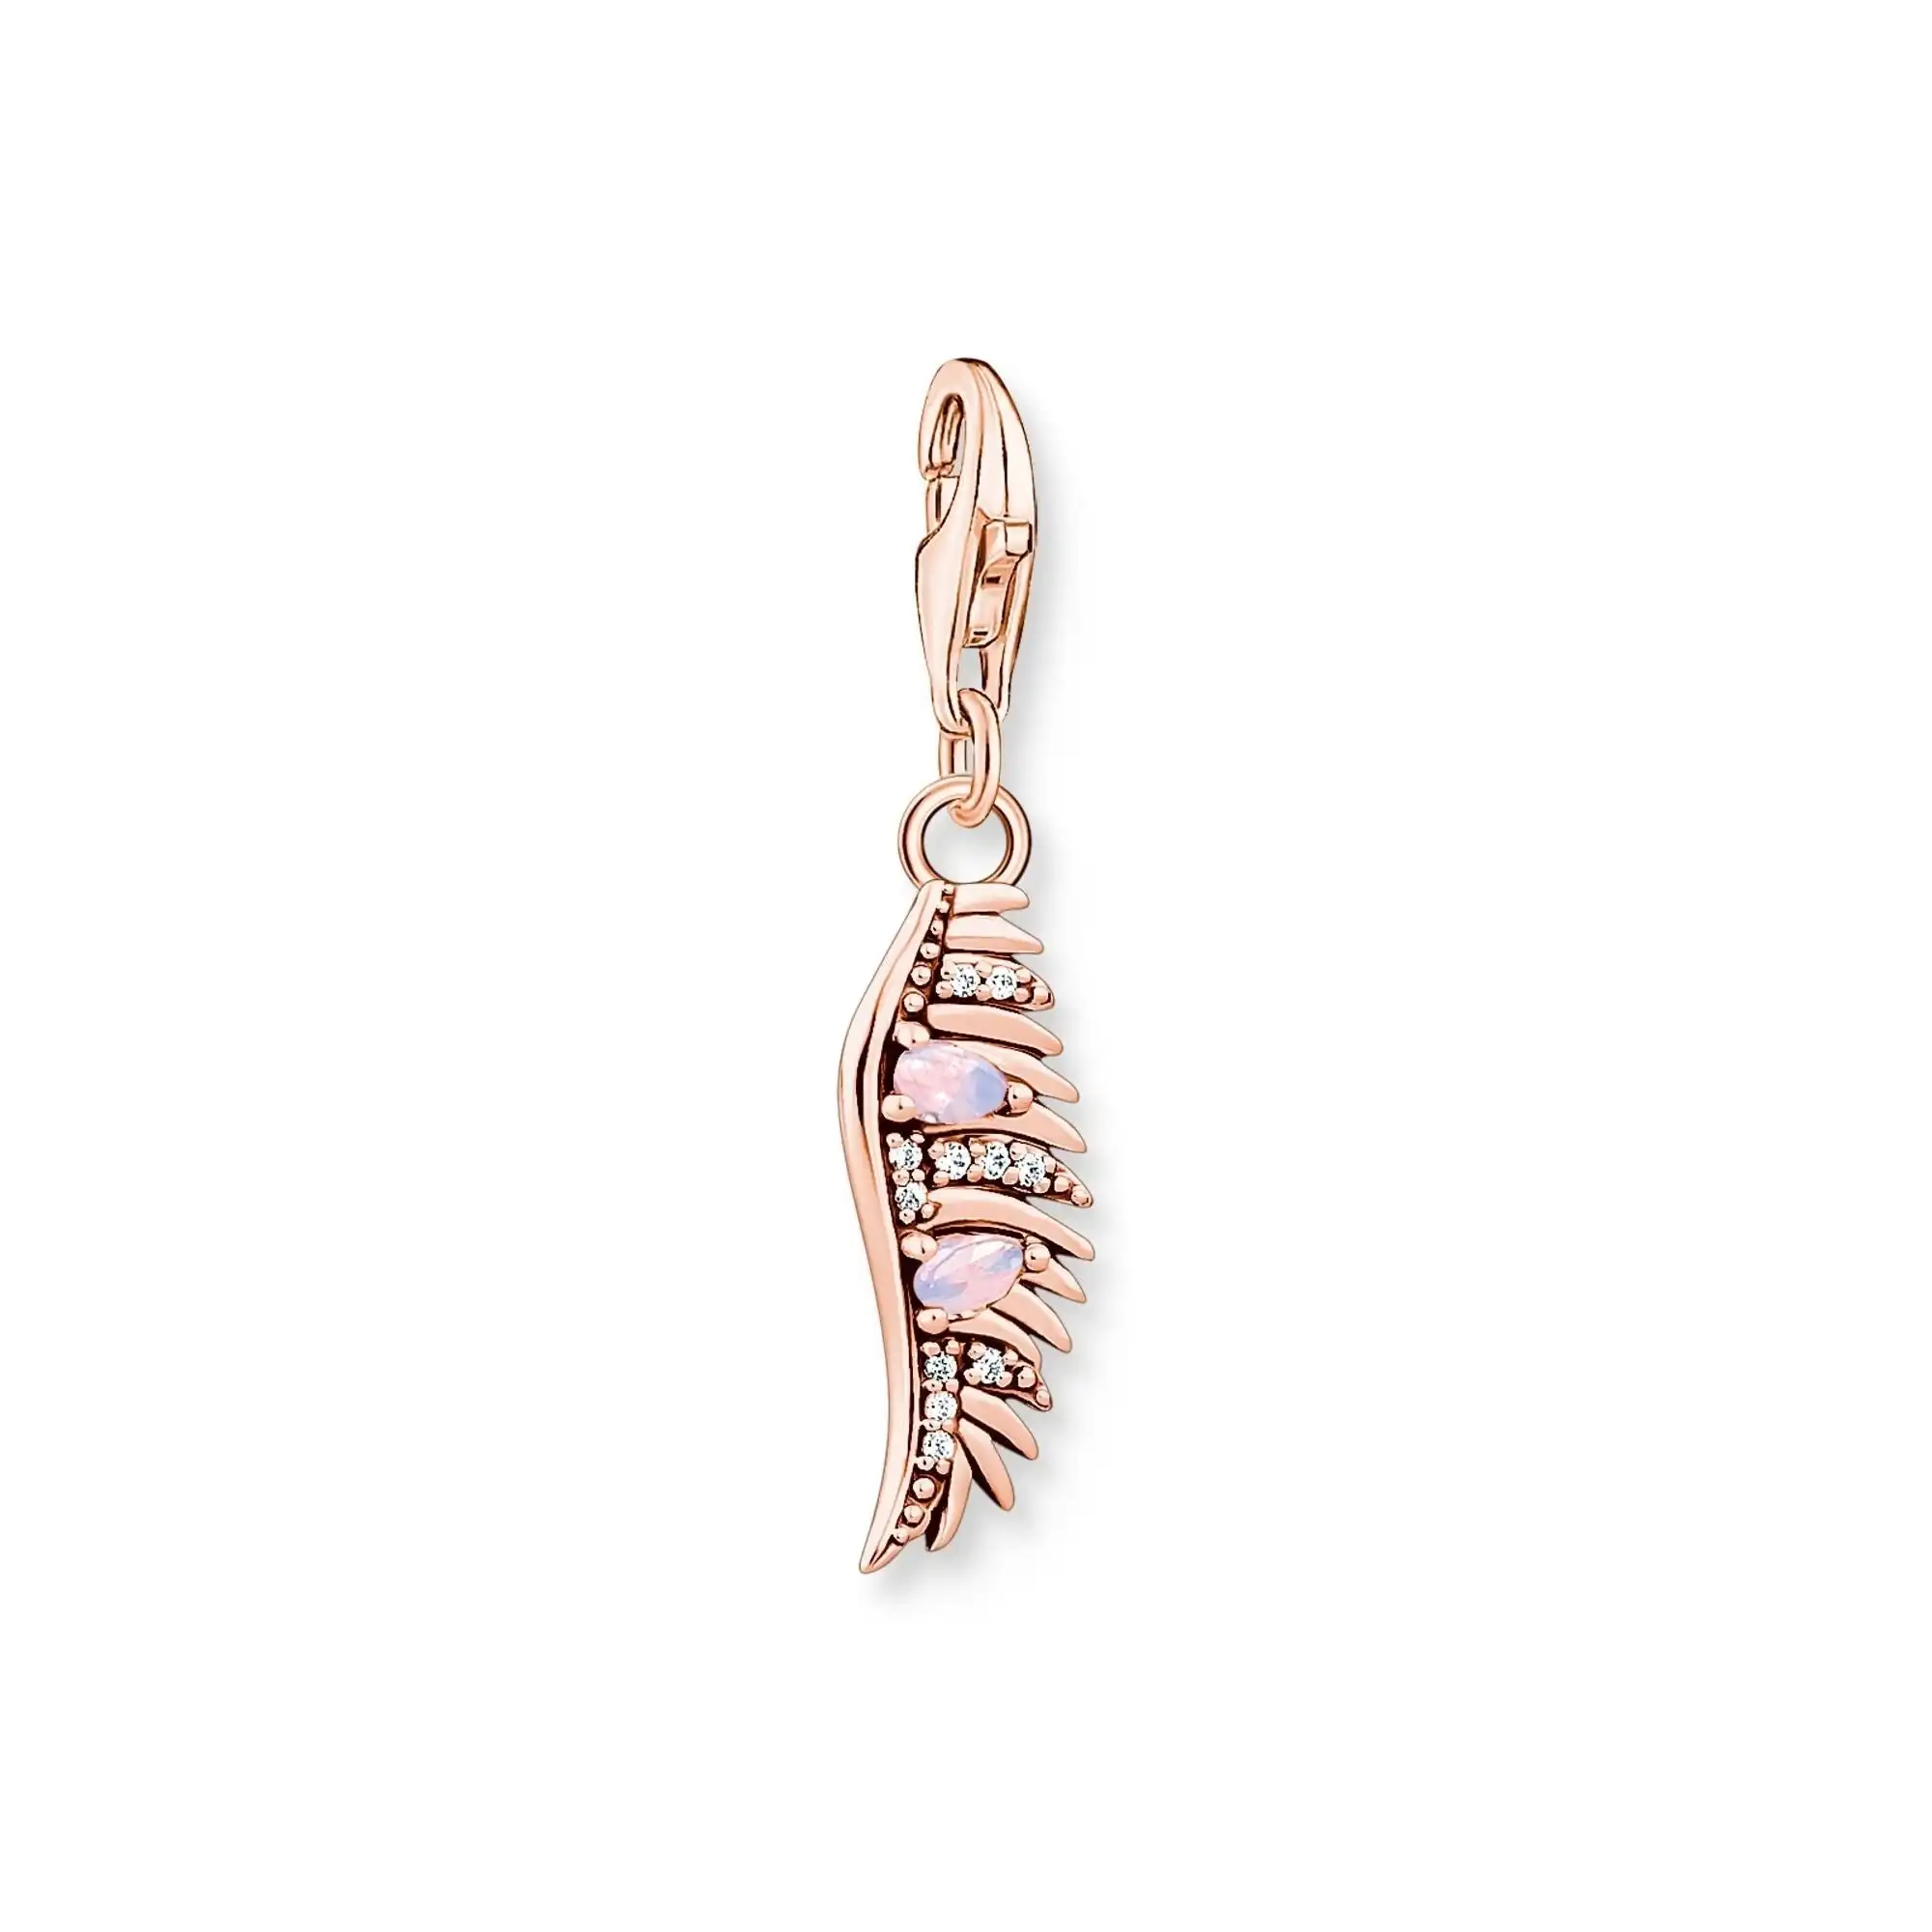 Thomas Sabo Charm pendant phoenix feather with pink stones rose gold